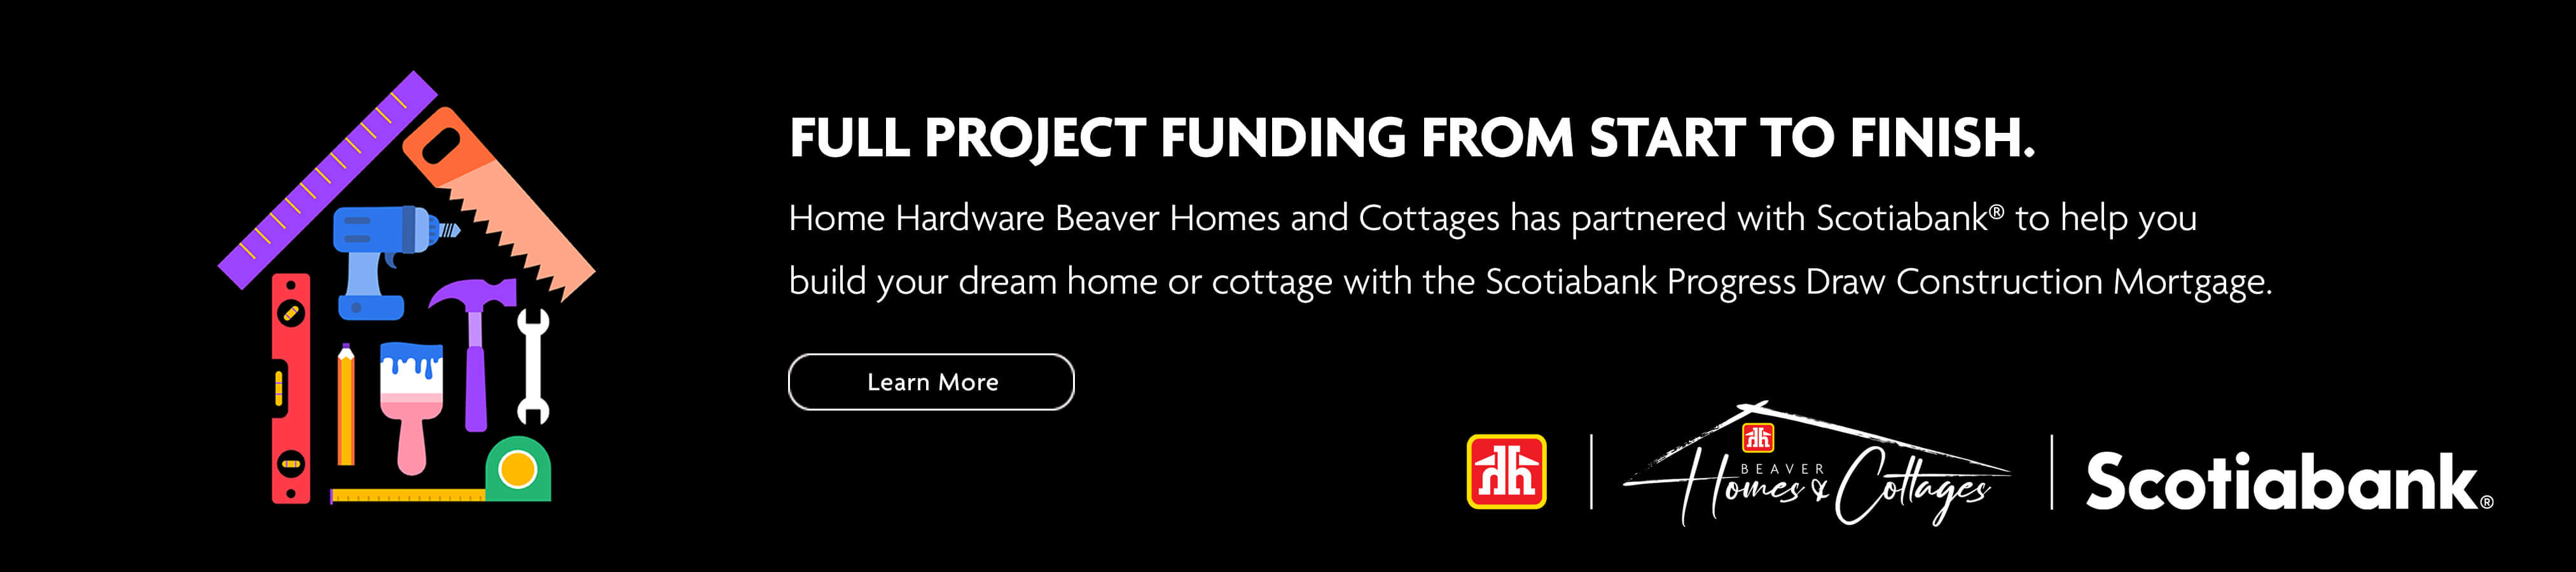 Full project funding from start to finish. Home Hardware Beaver Homes and Cottages has partnered with Scotiabank (R) to help you build your dream home or cottage with the Scotiabank Progress Draw Construction Mortgage. Learn more.